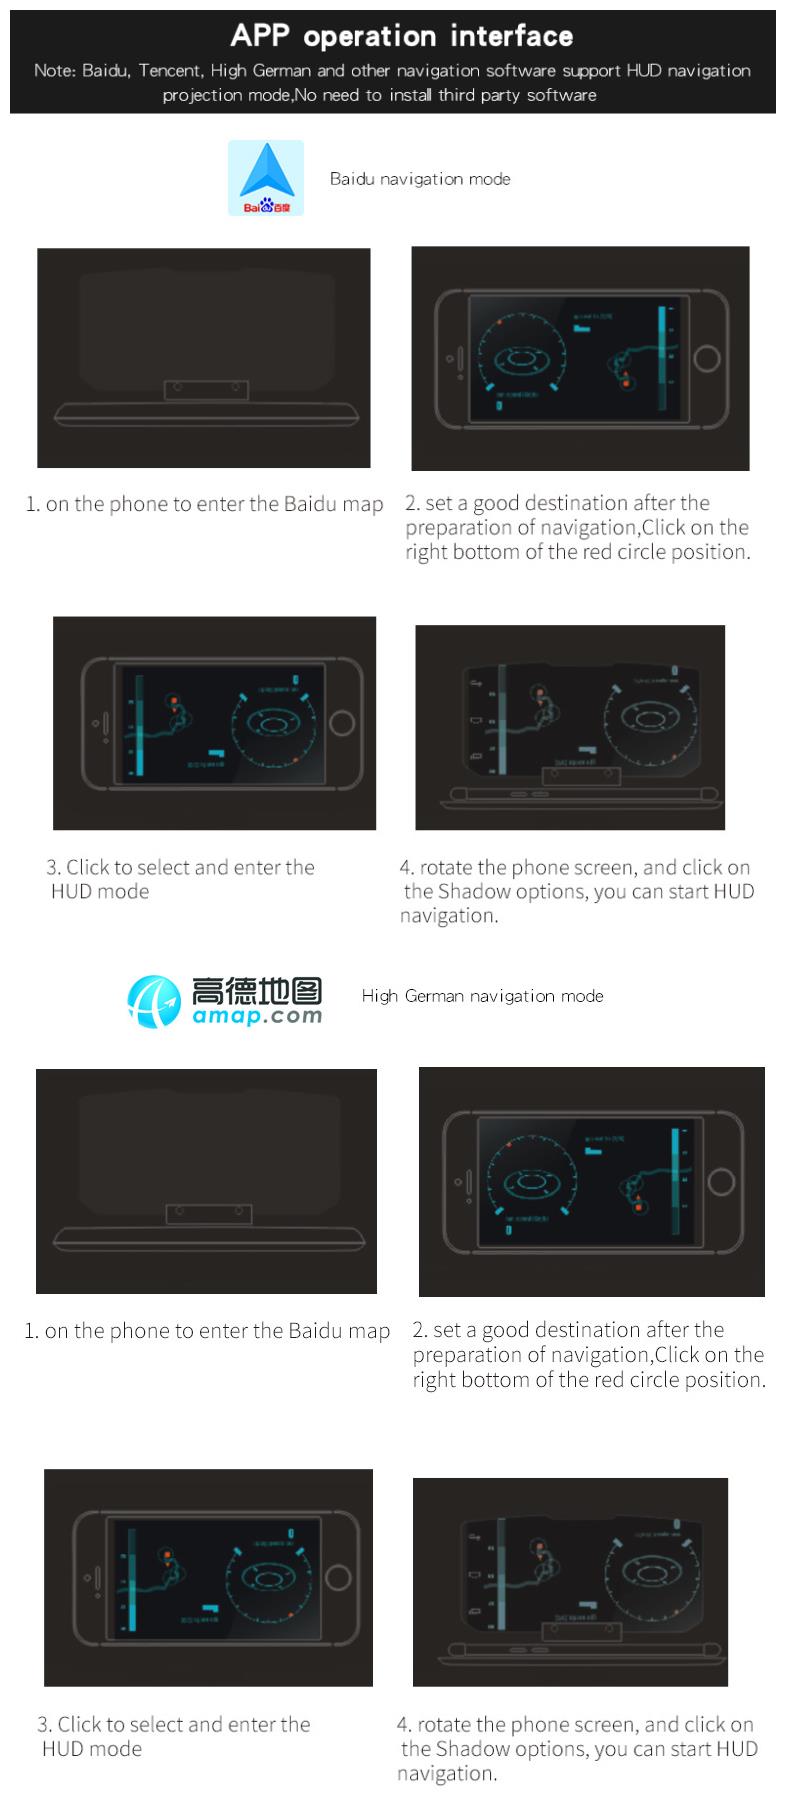 Heads-Up-Display-HUD-Mobile-Navigation-Support-Cell-Phone-GPS-Car-Holder-Stand-1153674